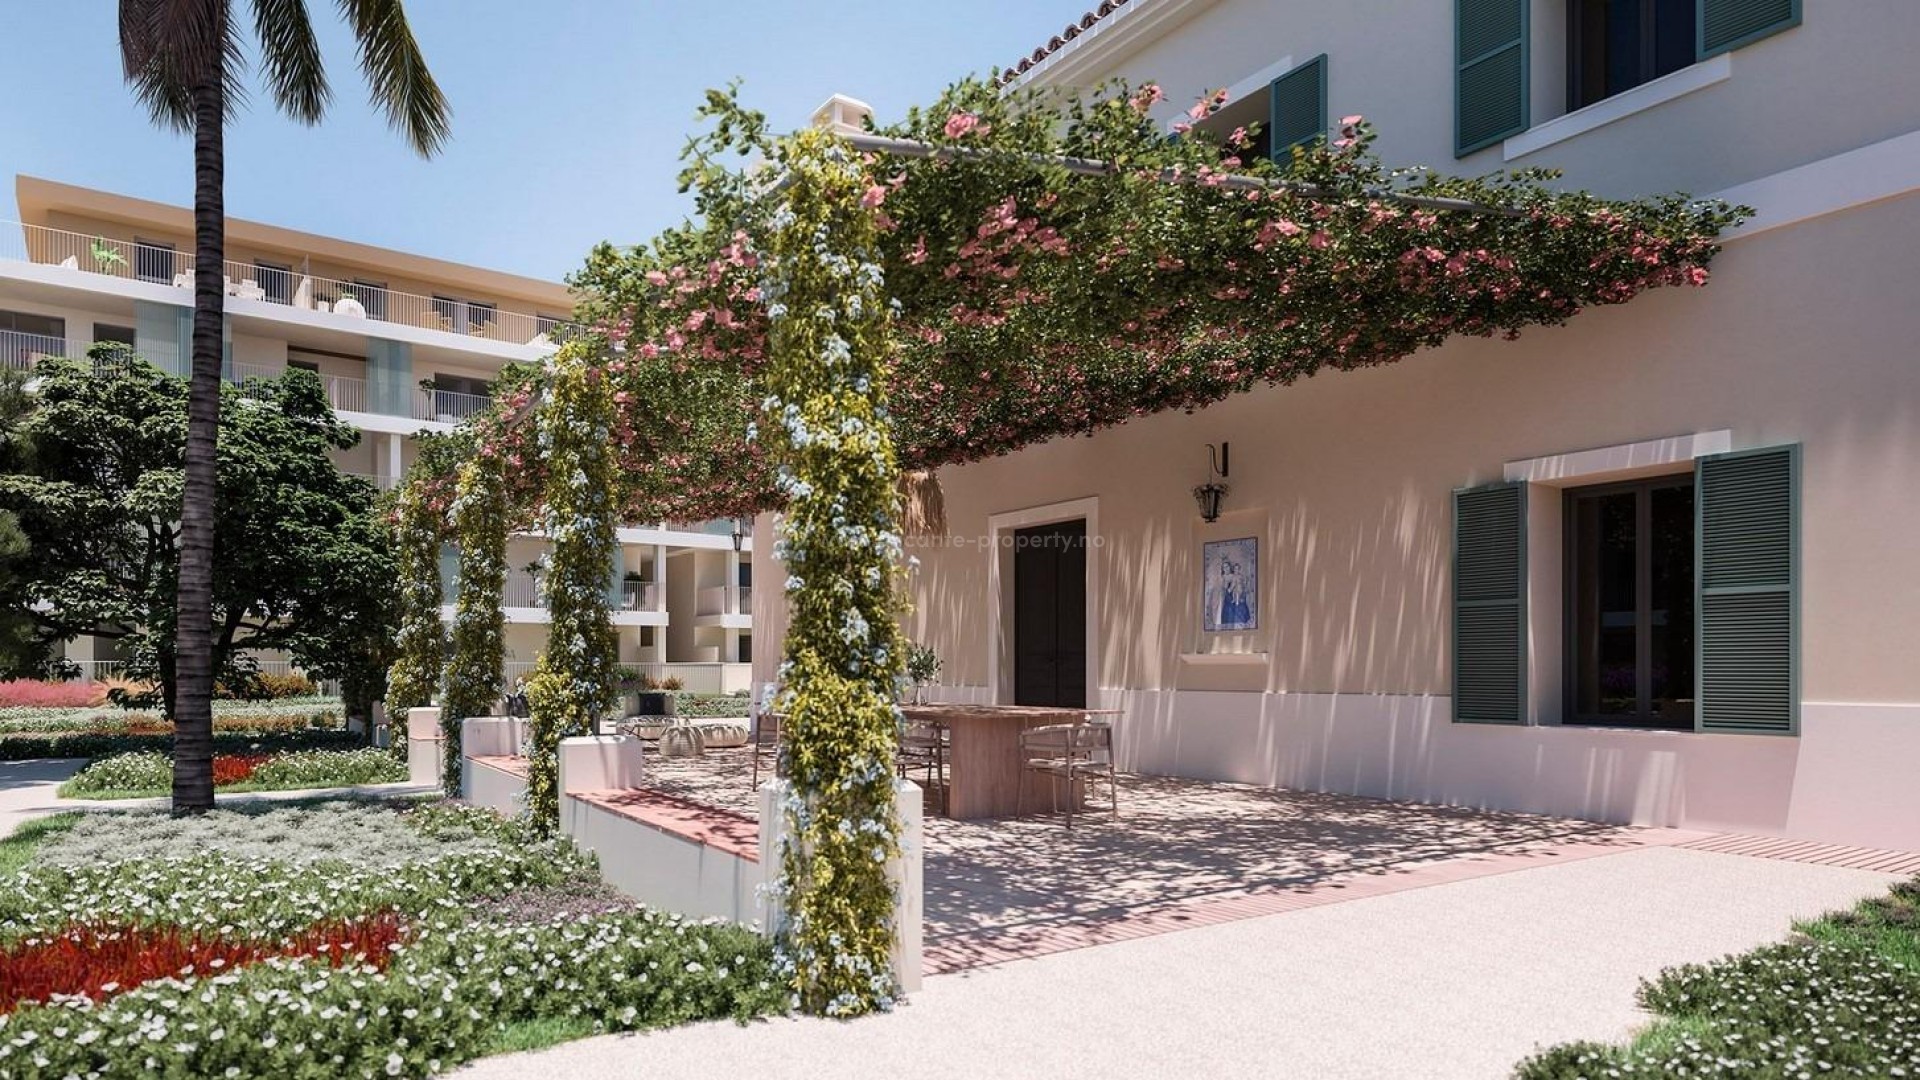 Exclusive new apartments and penthouses in Denia, 2/3/4 bedrooms, 2 bathrooms, all with terraces. Communal swimming pool and gym. Steps from the sea.